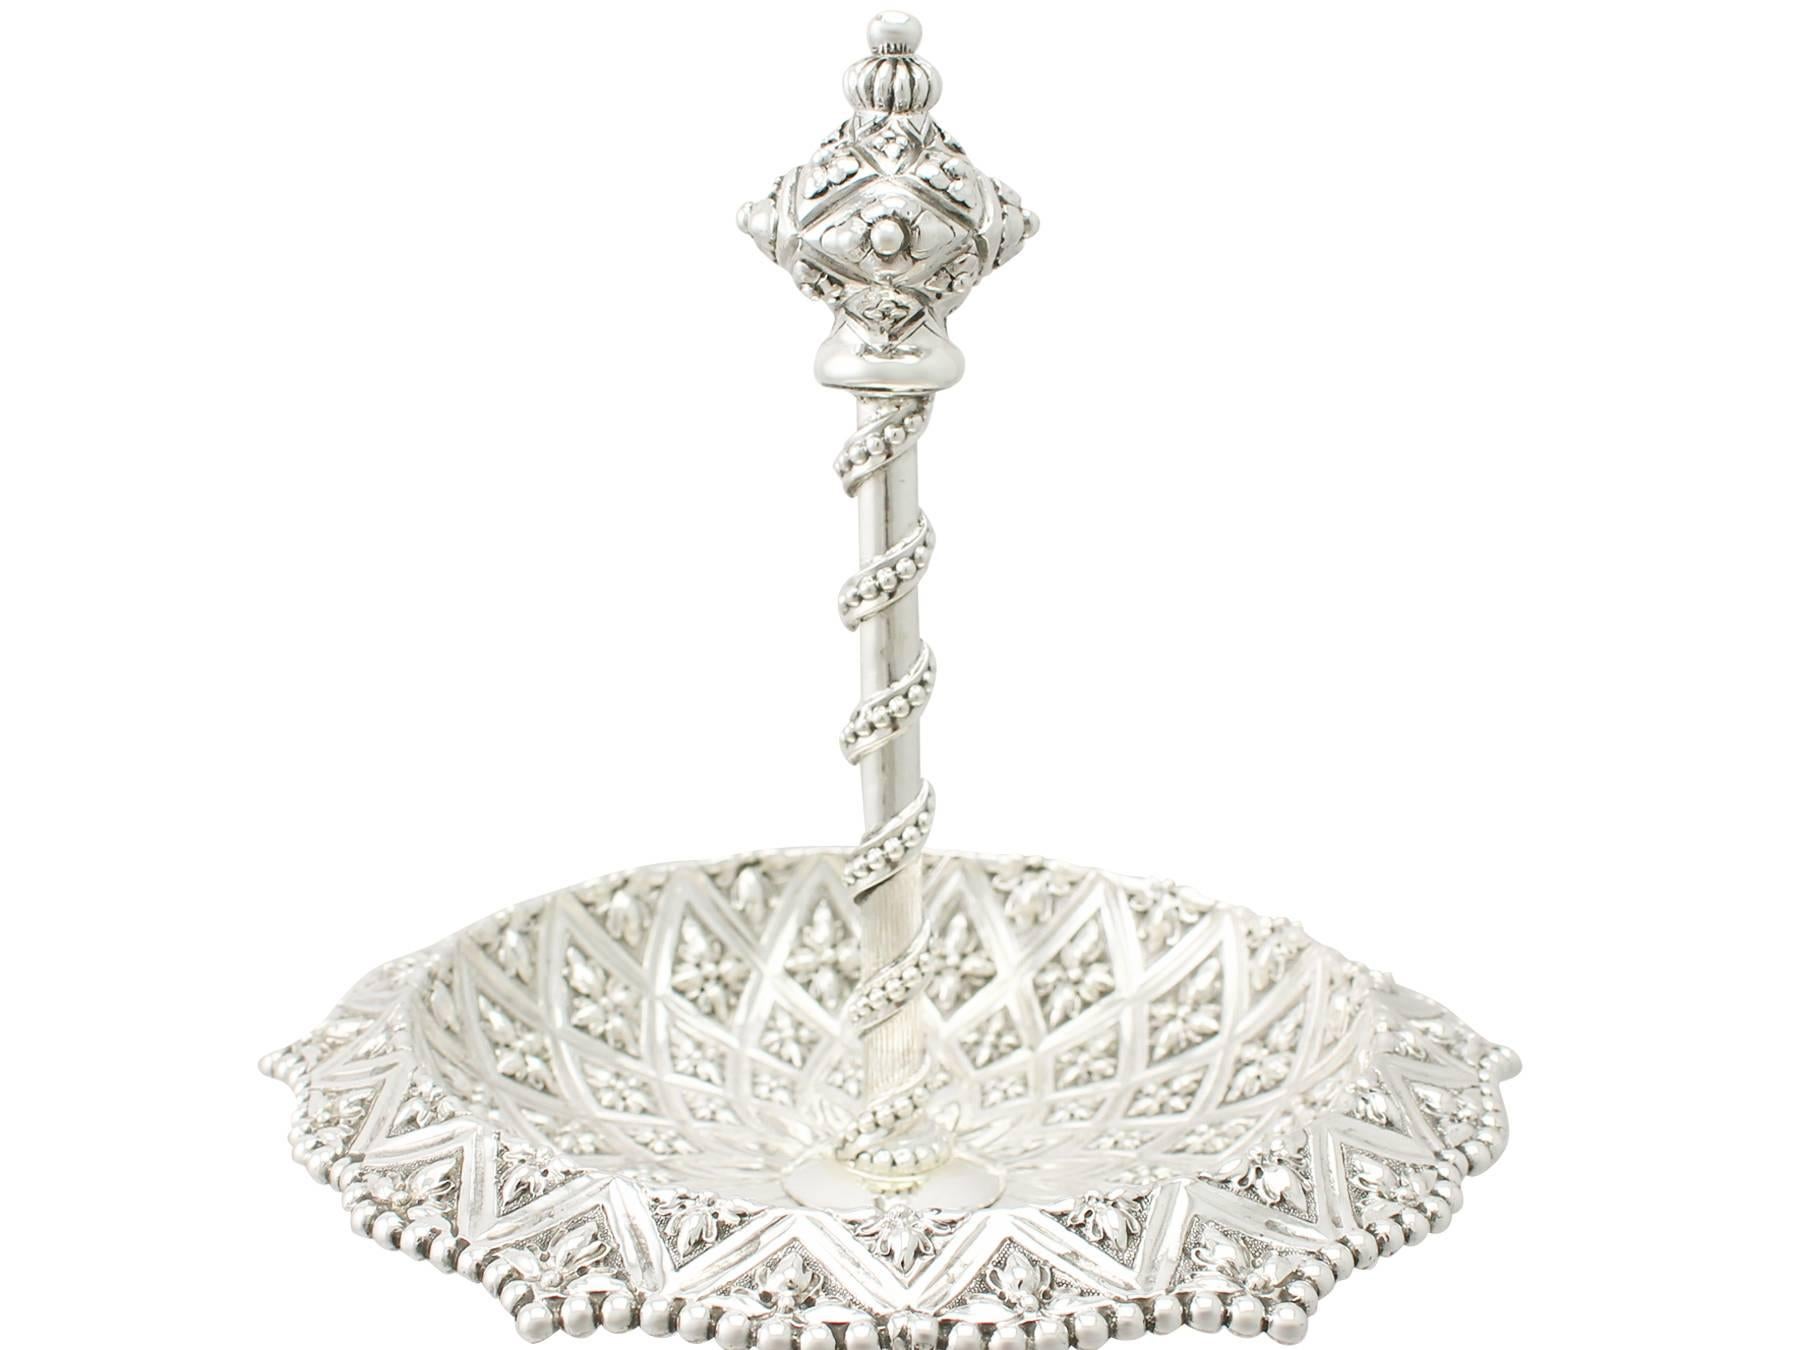 English Sterling Silver Cake Stand or Centerpiece by Robert Hennell III, Victorian